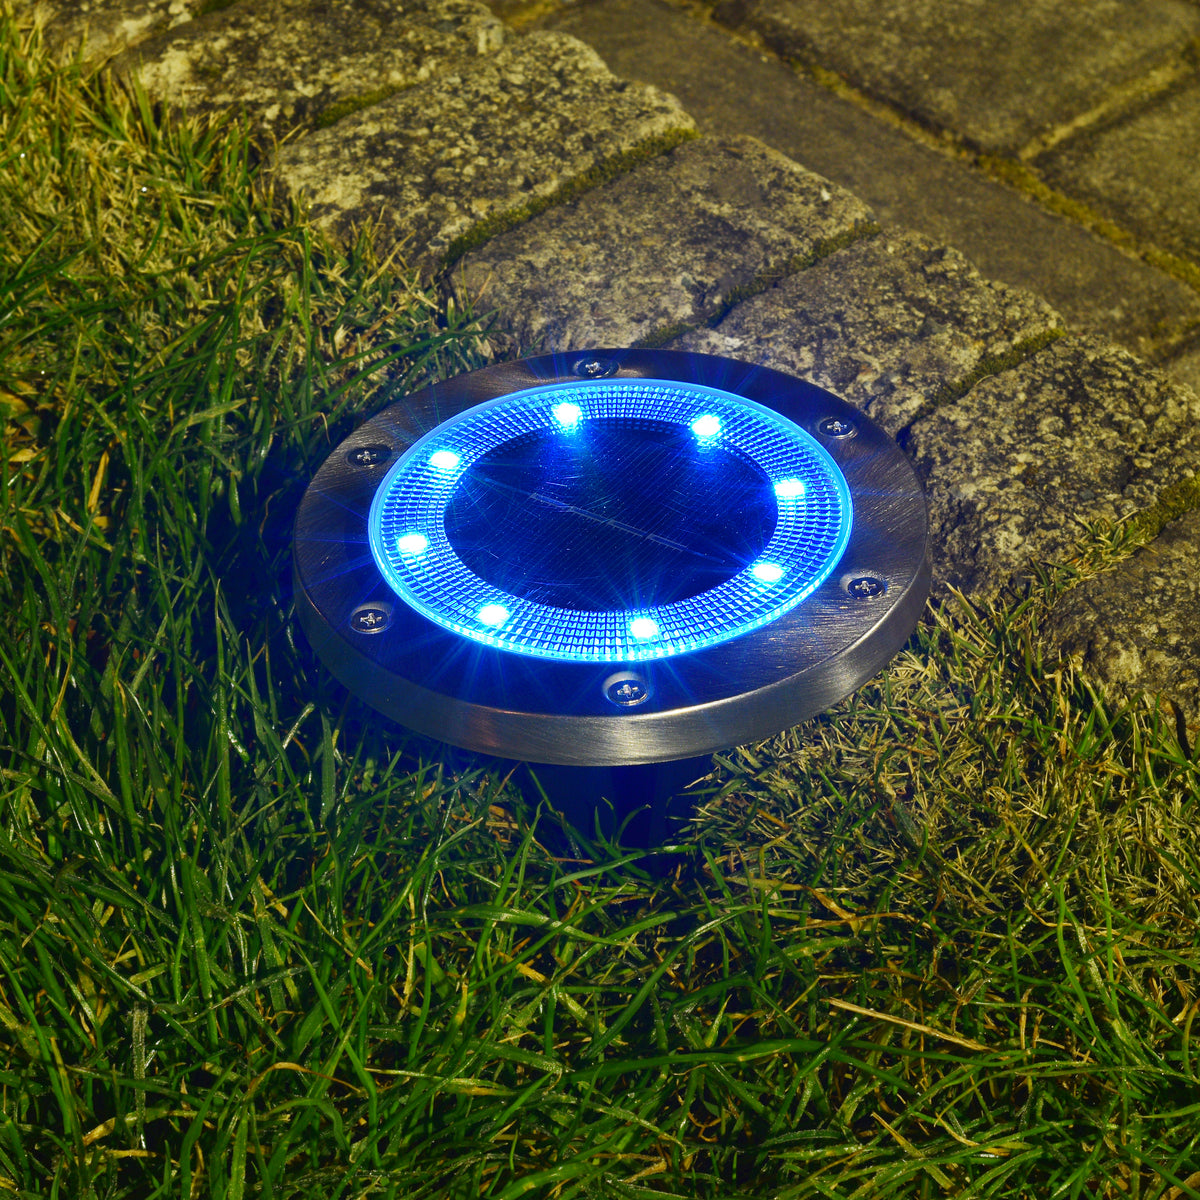 Bliss Outdoors Solar Powered LED Metal Disc Pathway light in the ground lighting up blue.